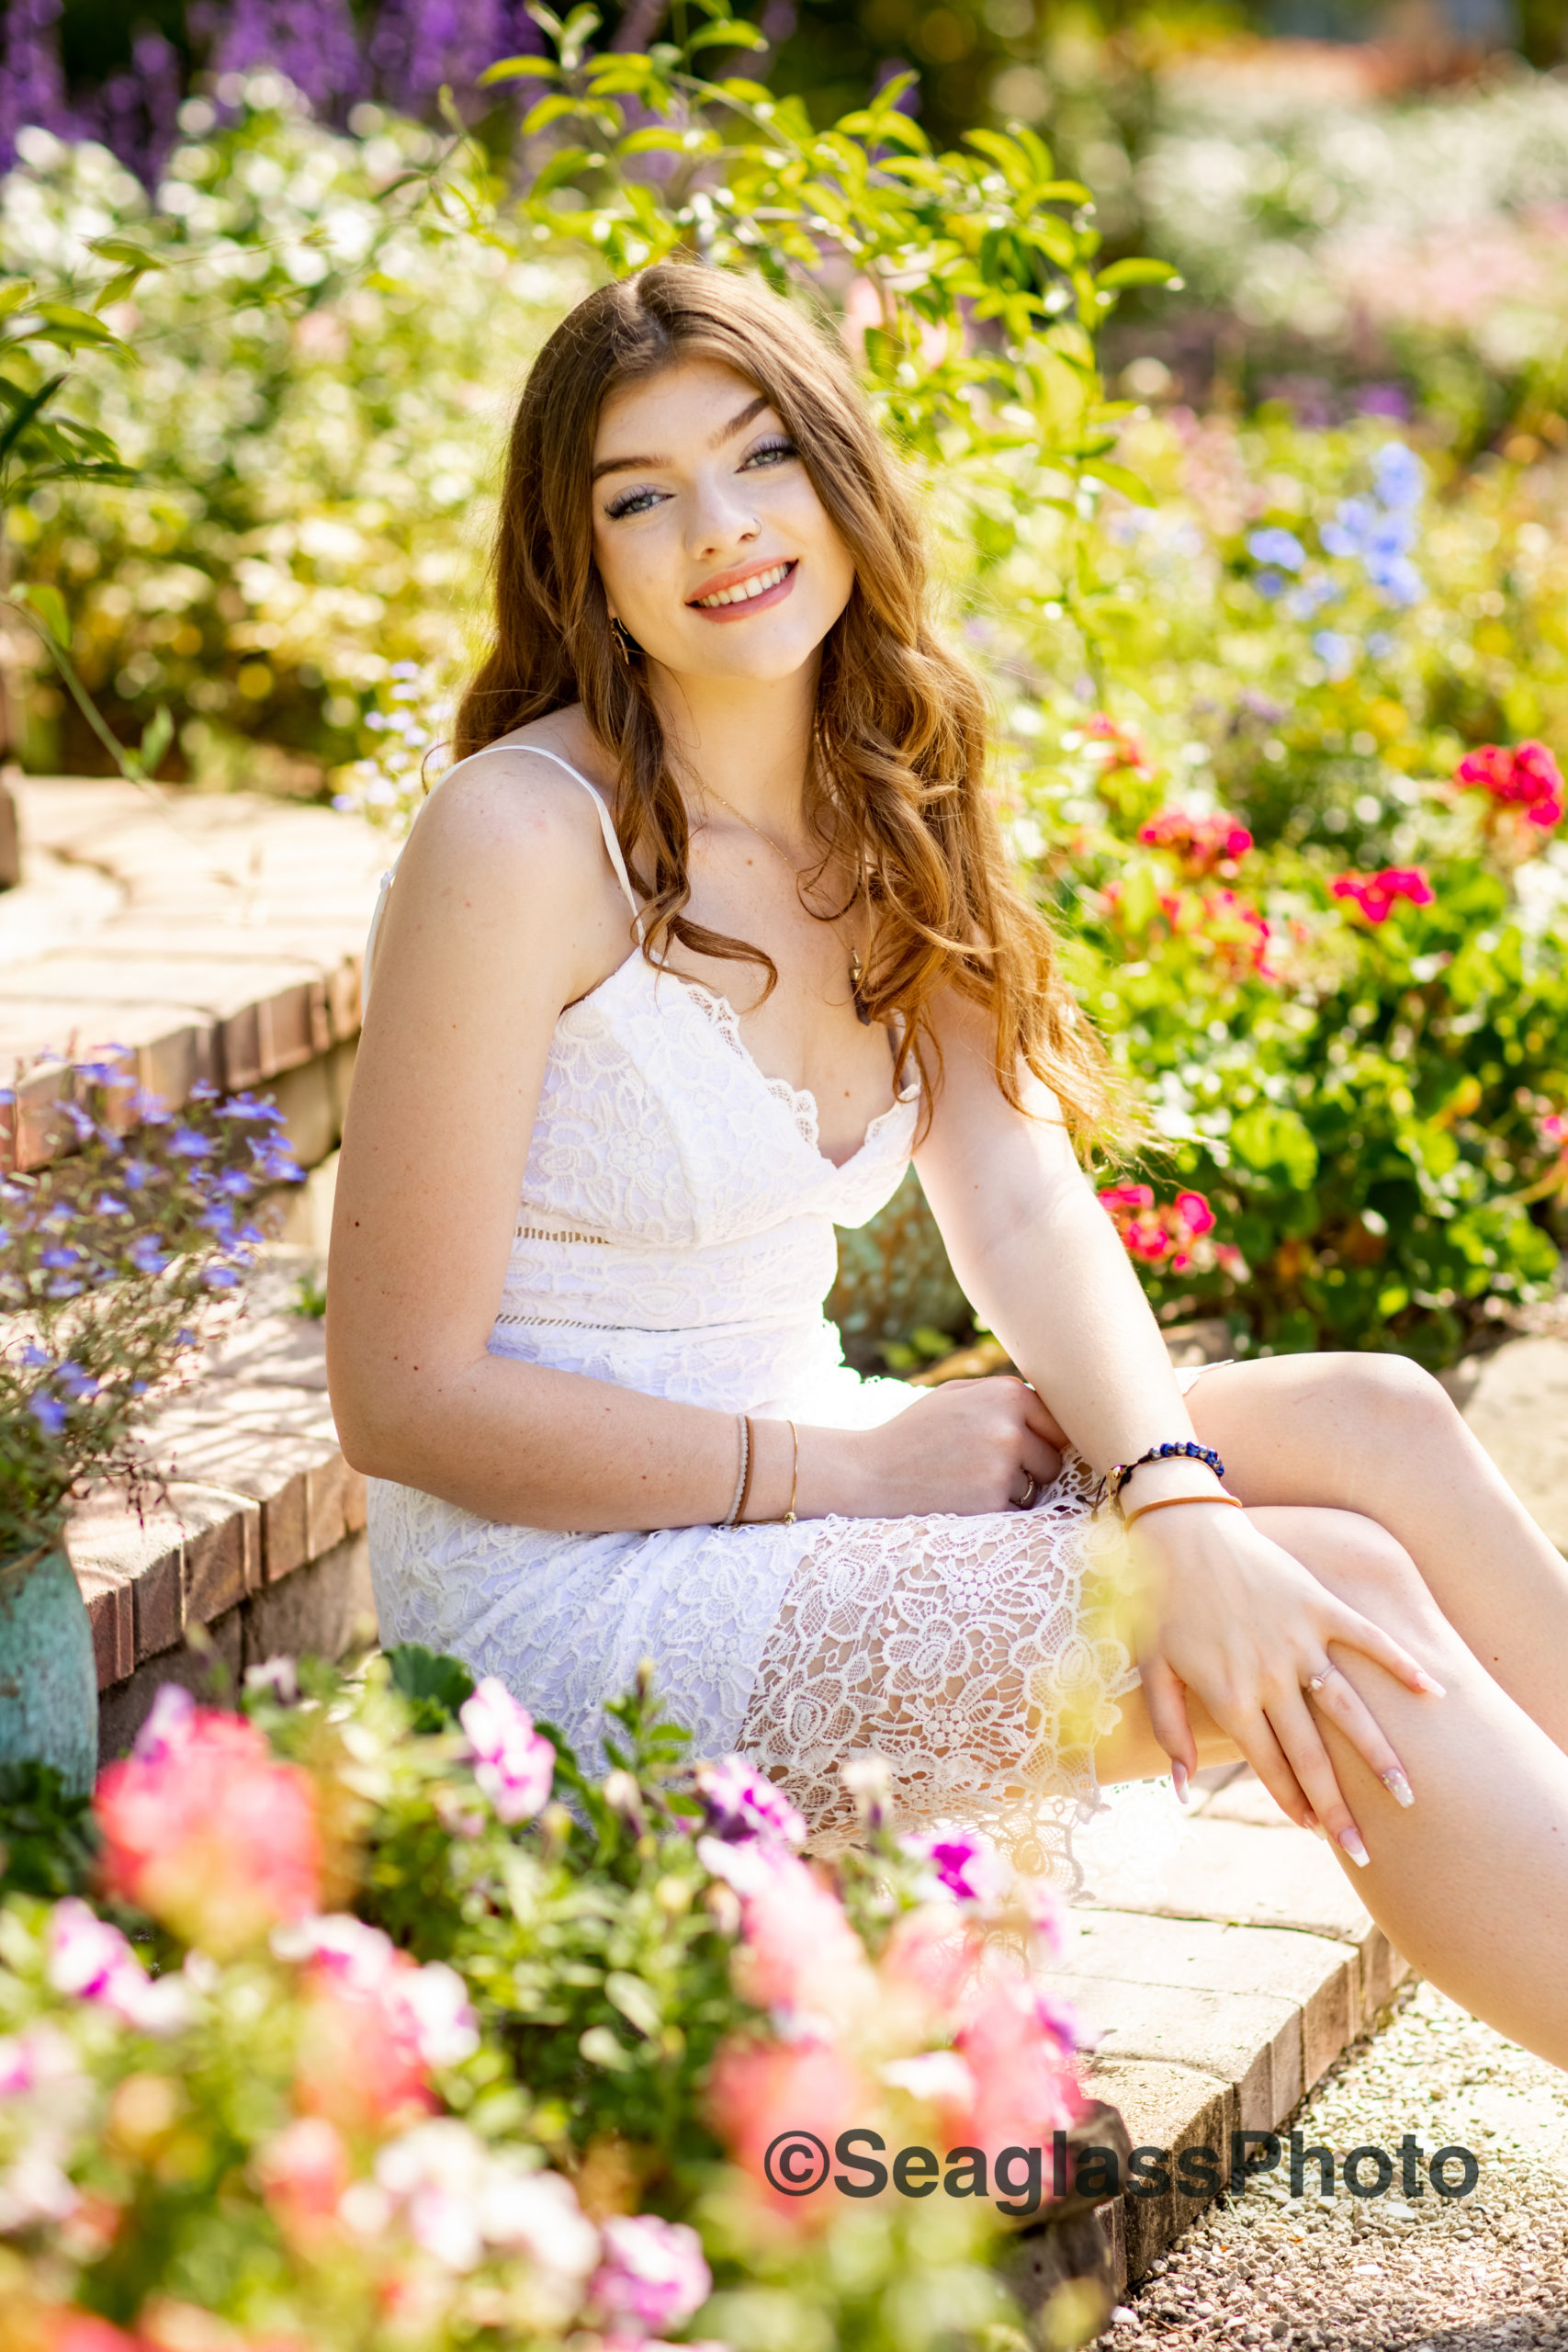 Rocky City Gardens with high school senior girl with long brown hair and wearing a white lace dress surrounded by purple and pink flowers 